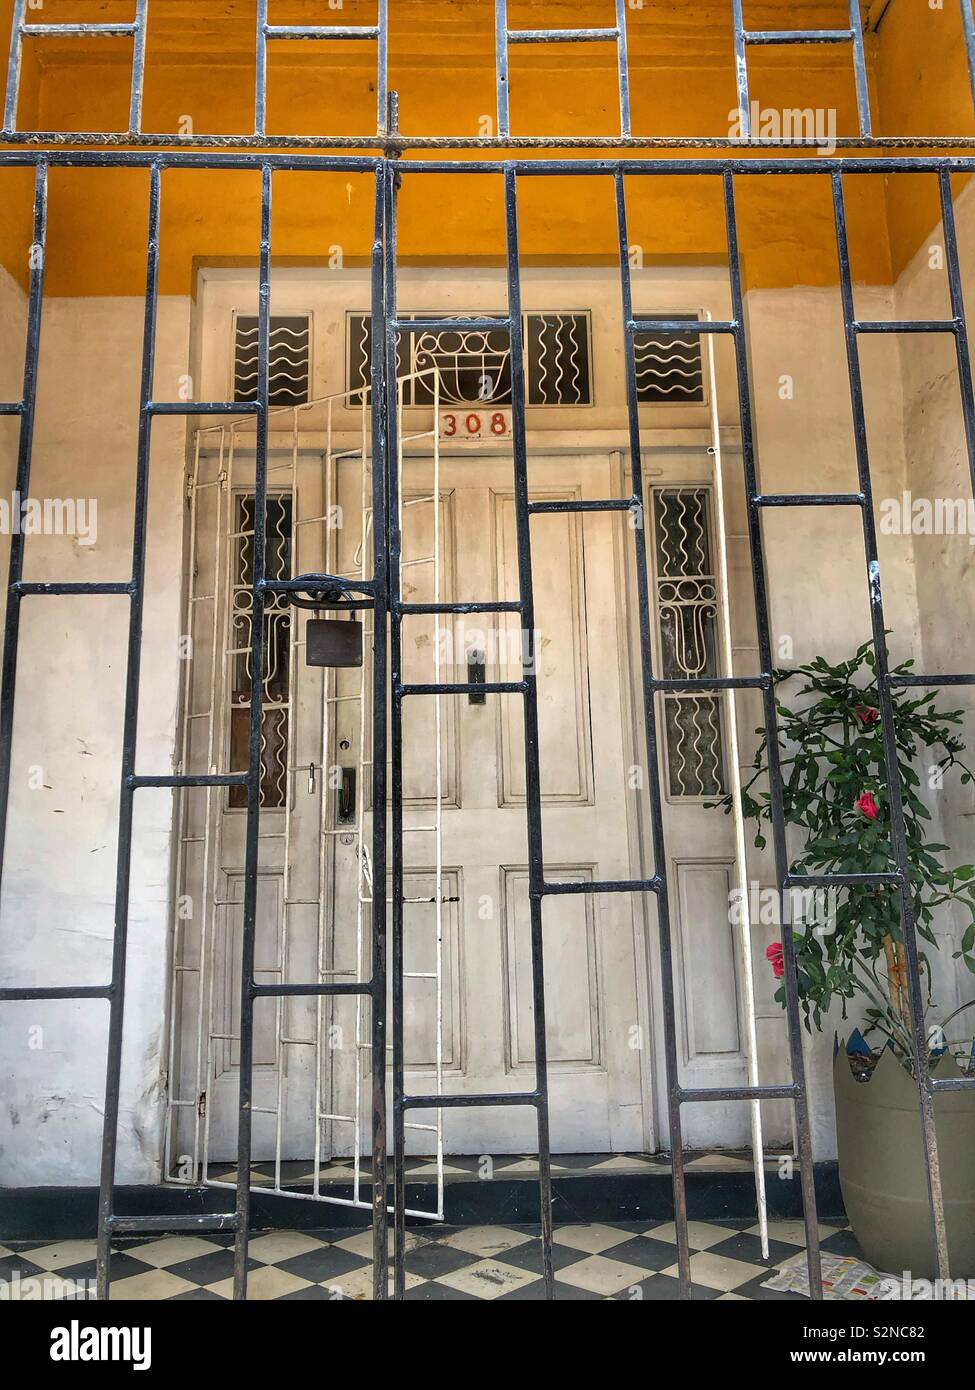 The gated entrance to a colonial building in Old Town Santa Marta, Colombia. Stock Photo